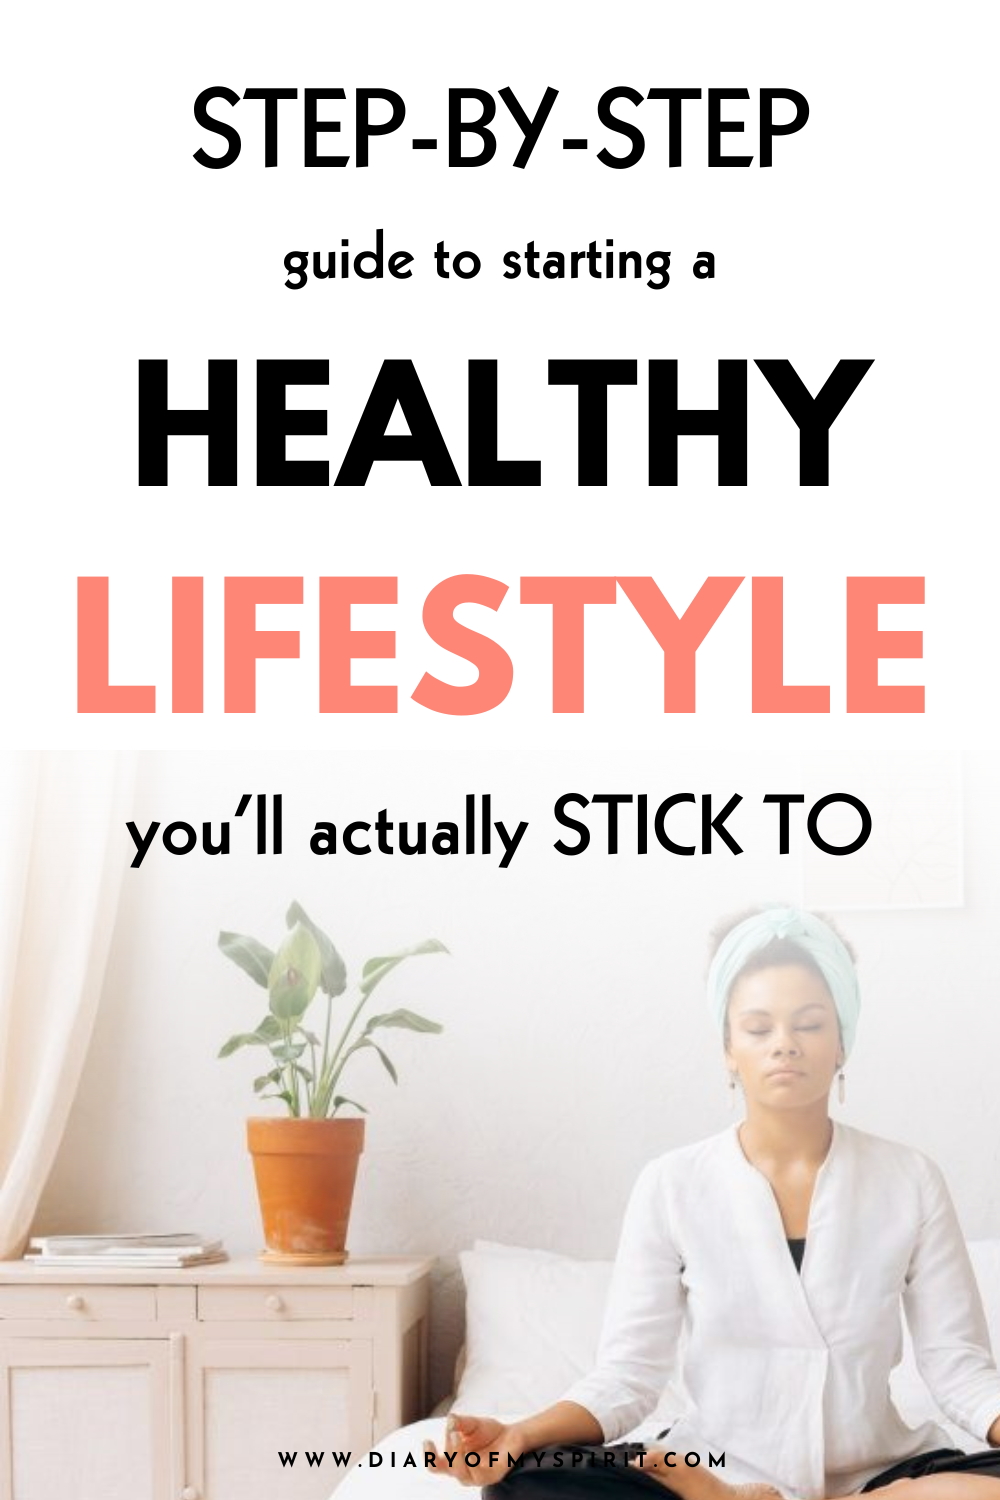 how to start a healthy lifestyle. how to be healthier. healthier lifestyle tips and ideas. healthy living ideas. daily habits for living a better life.